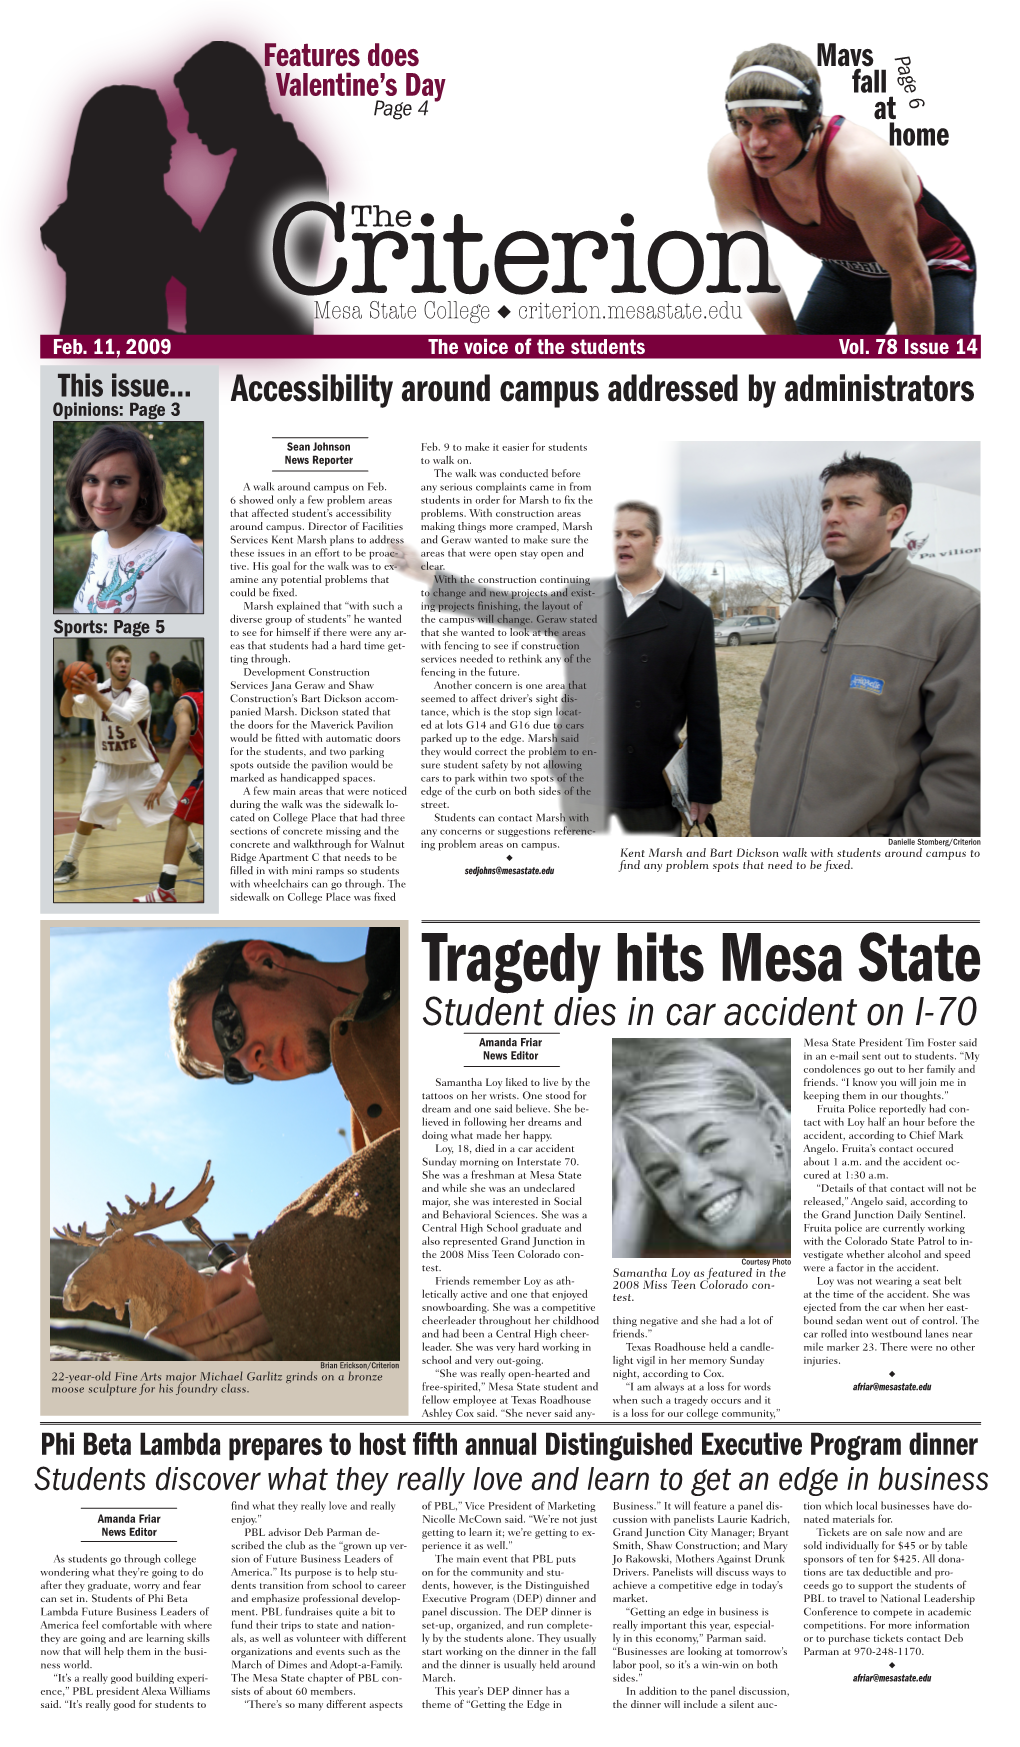 Tragedy Hits Mesa State Student Dies in Car Accident on I-70 Amanda Friar Mesa State President Tim Foster Said News Editor in an E-Mail Sent out to Students